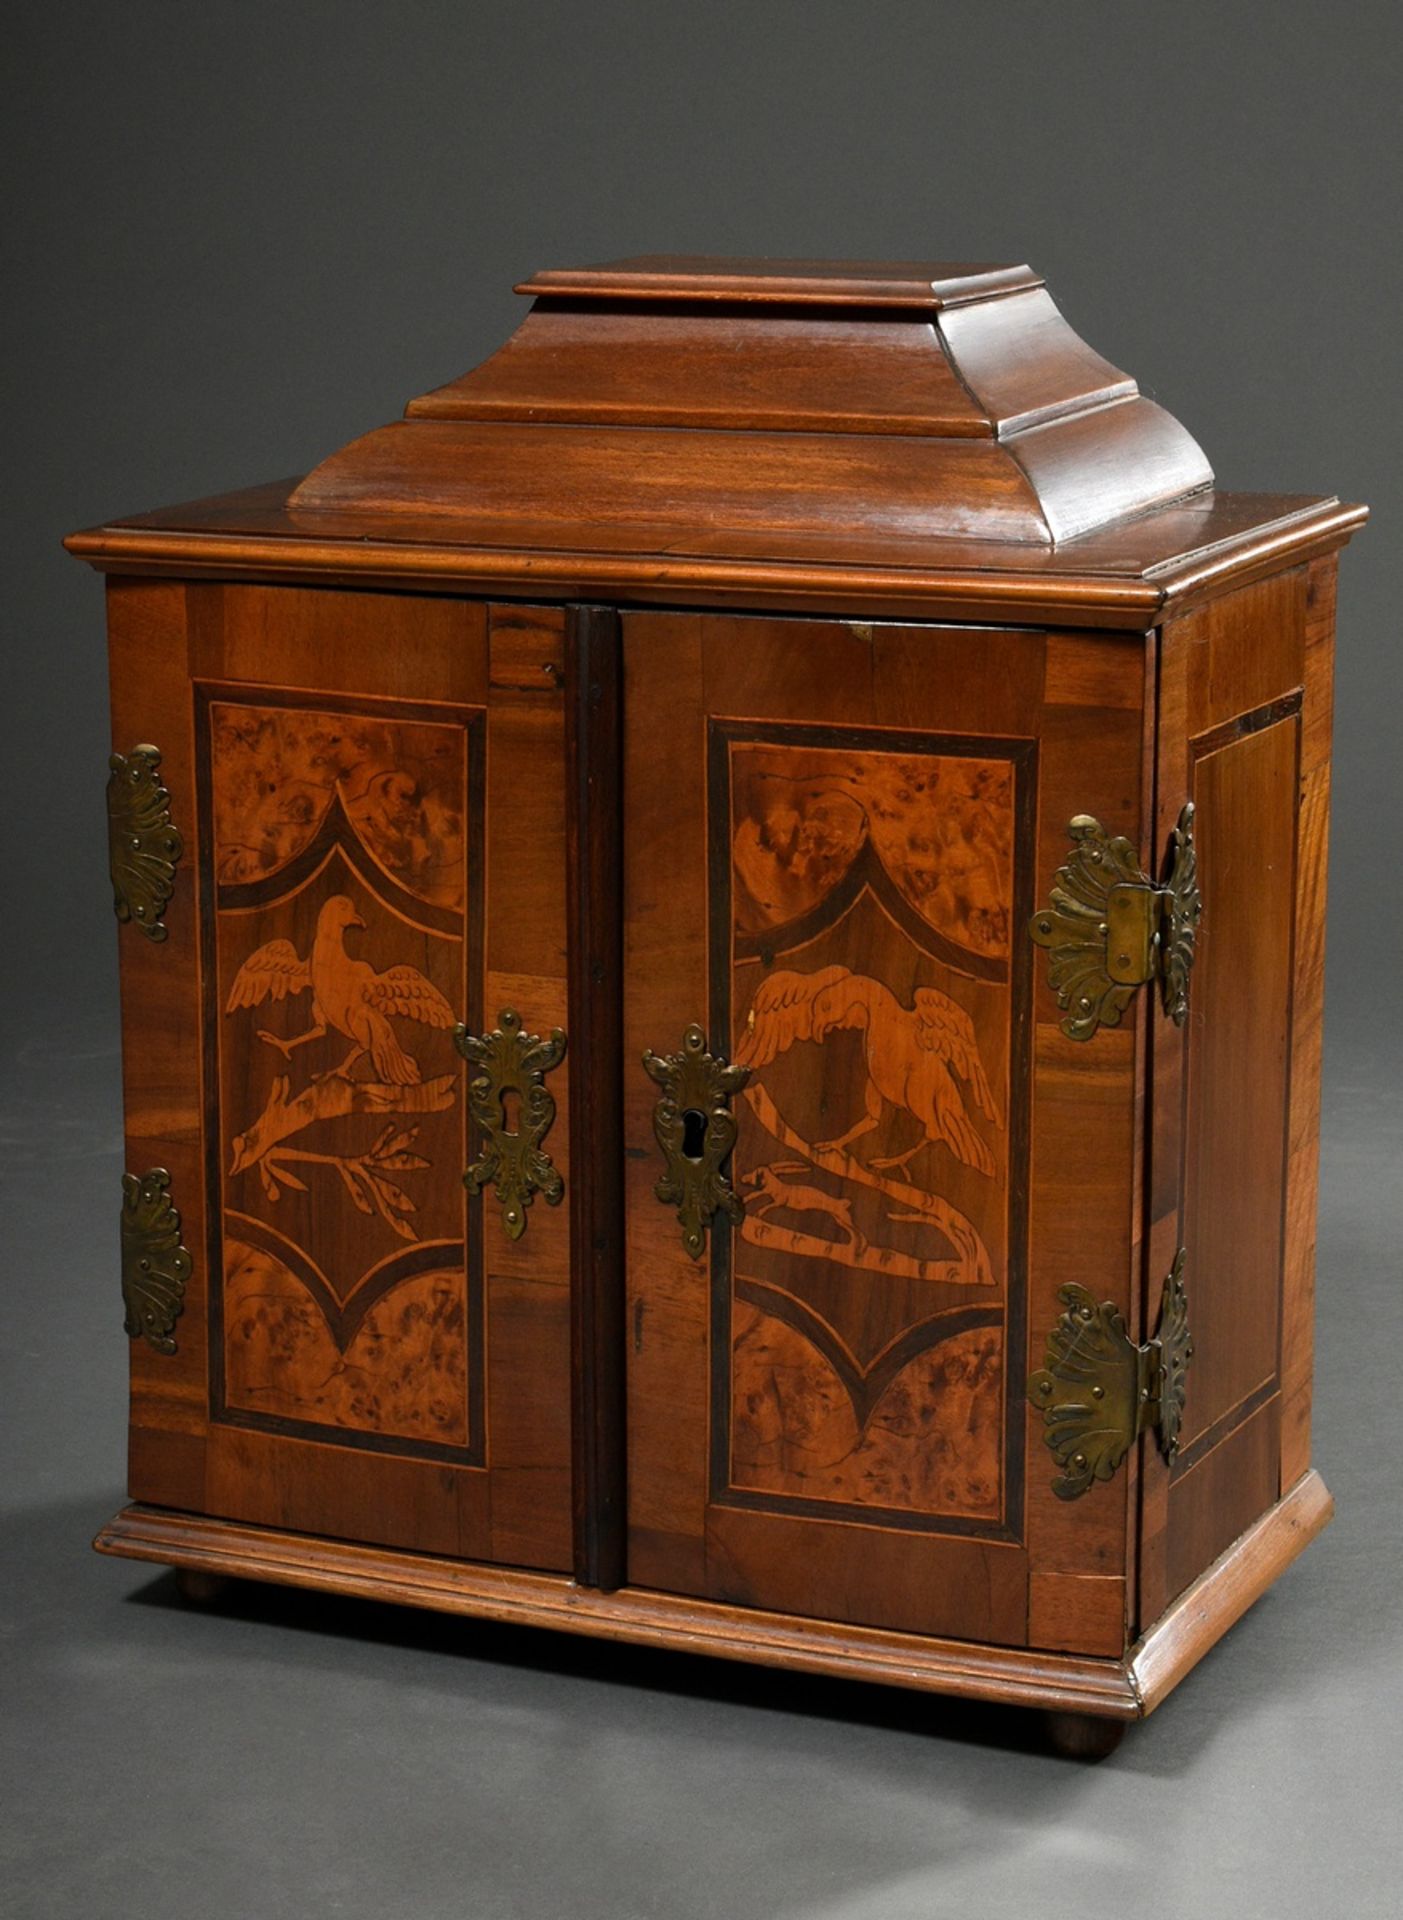 Small baroque hanging cabinet with inlaid corpus "birds" and drawers inside, early 18th century, 48